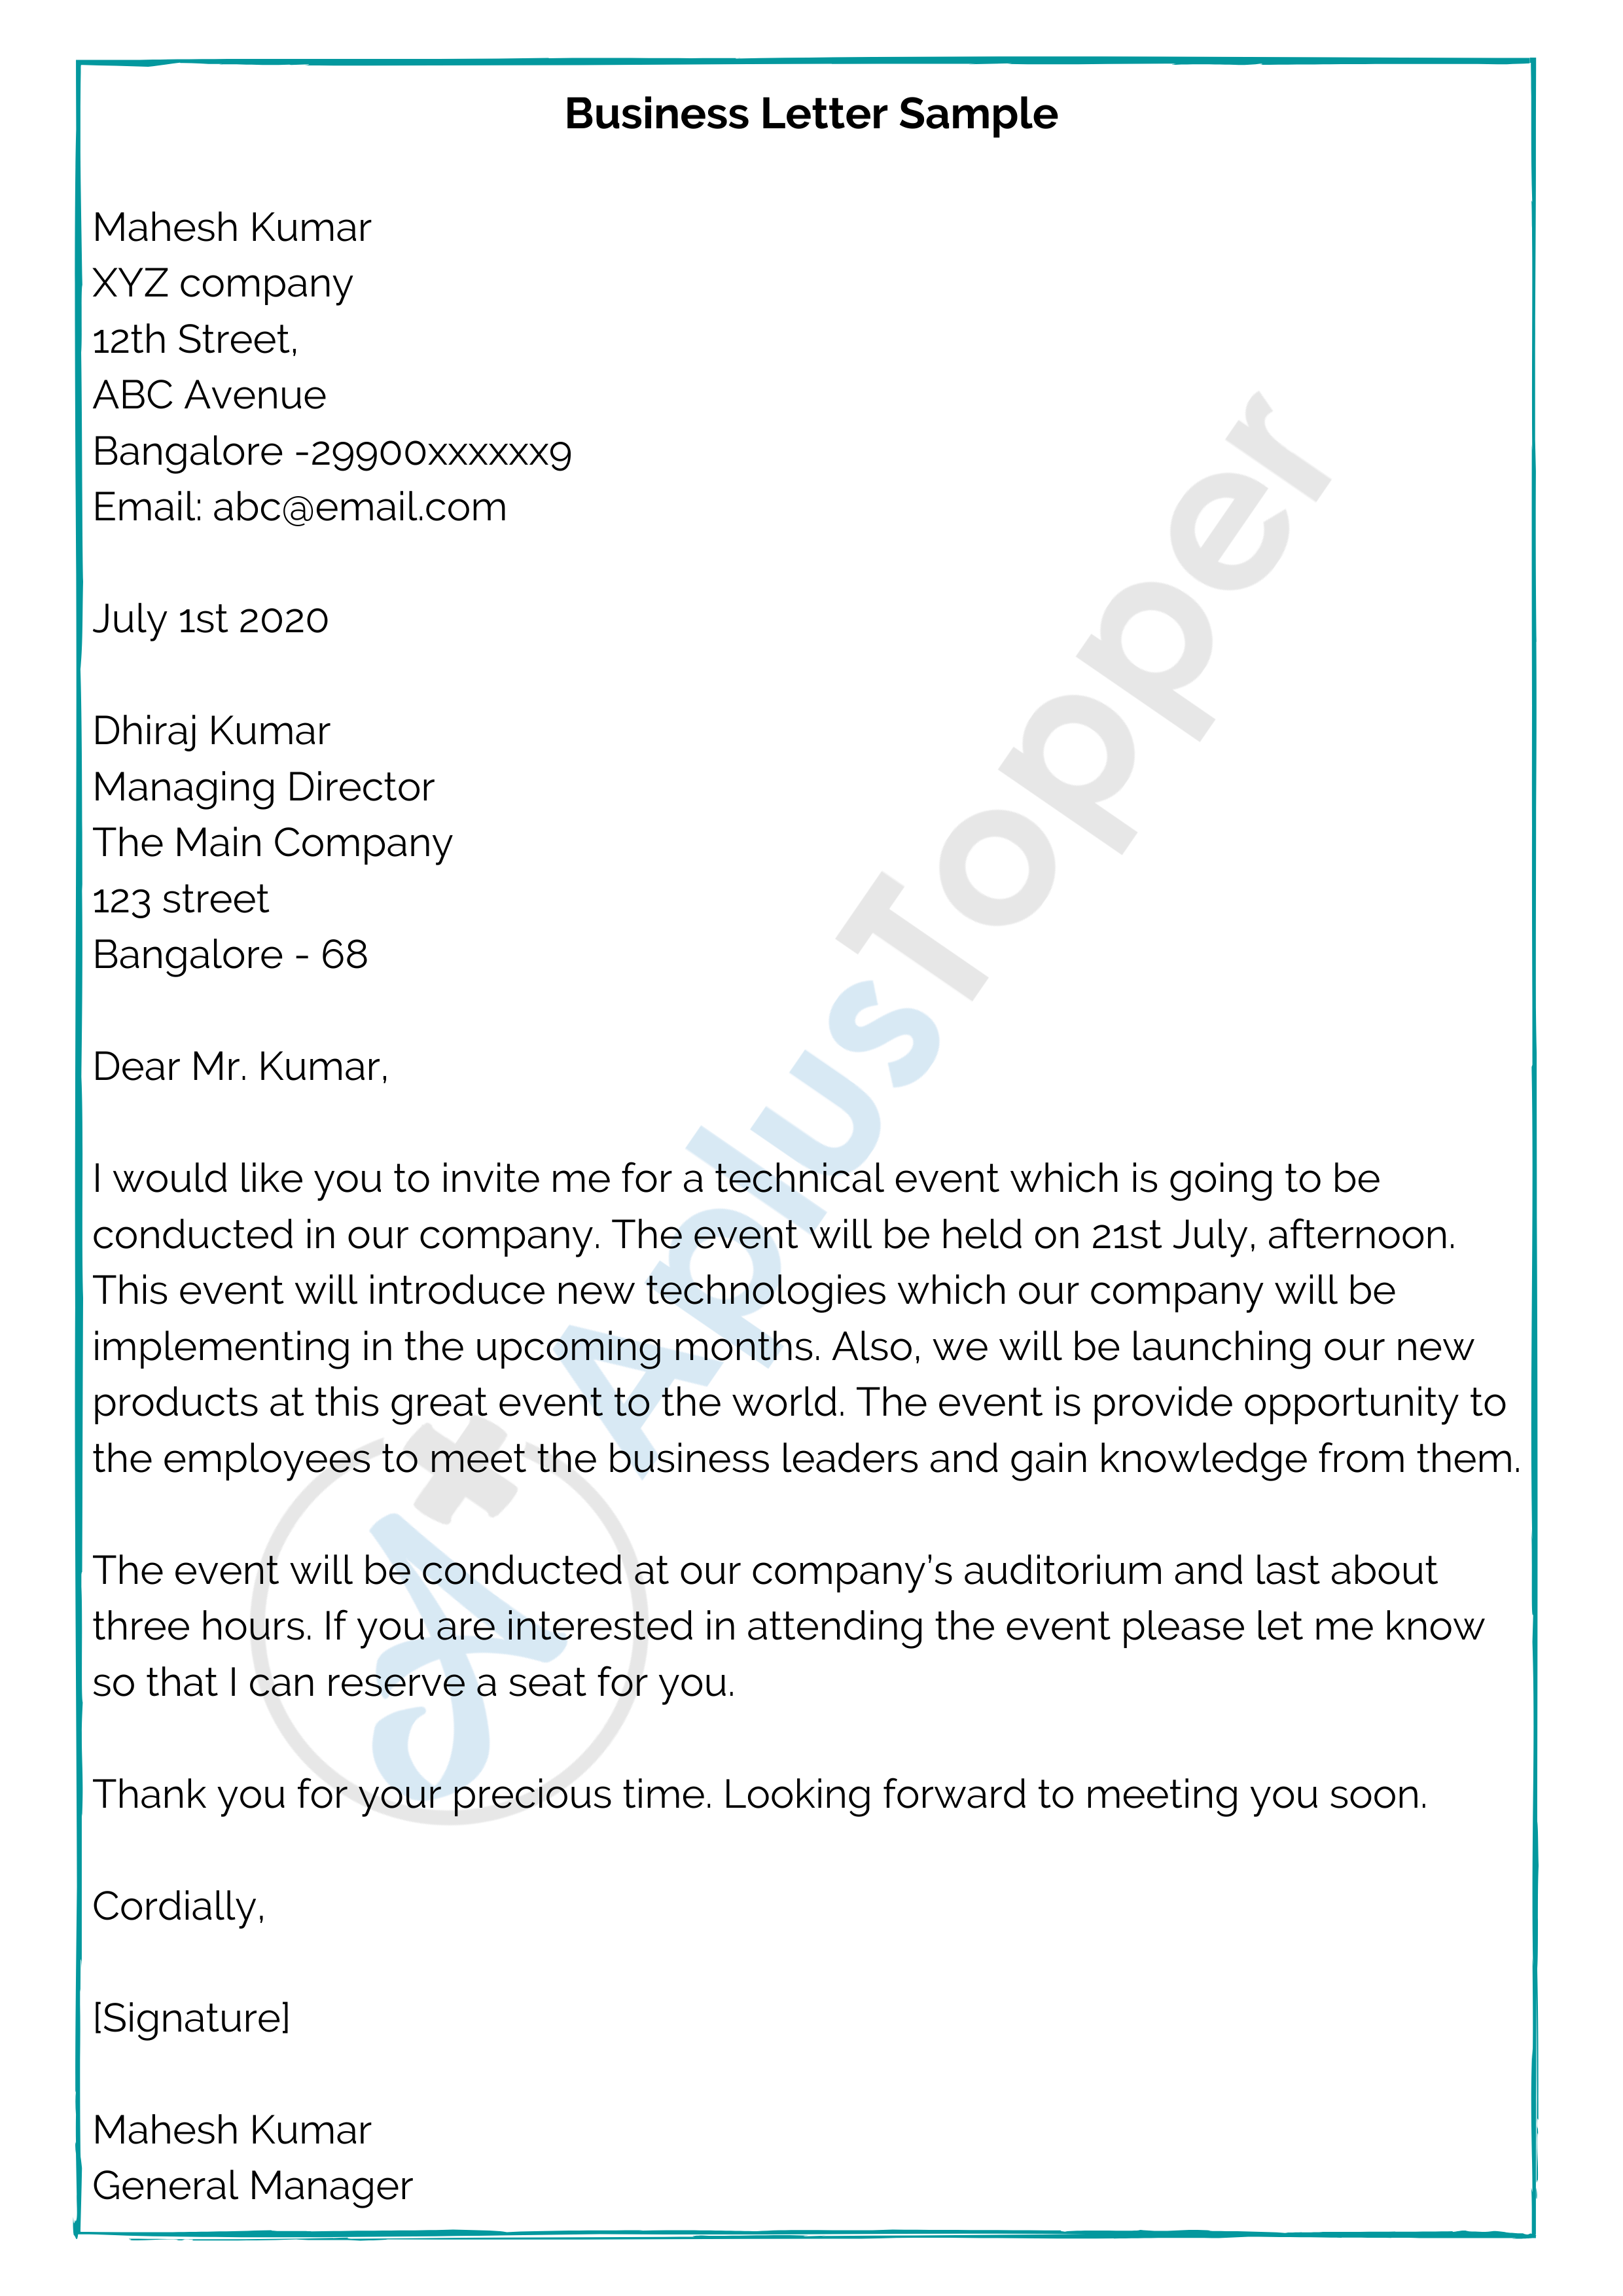 business-letter-format-samples-how-to-write-business-letter-a